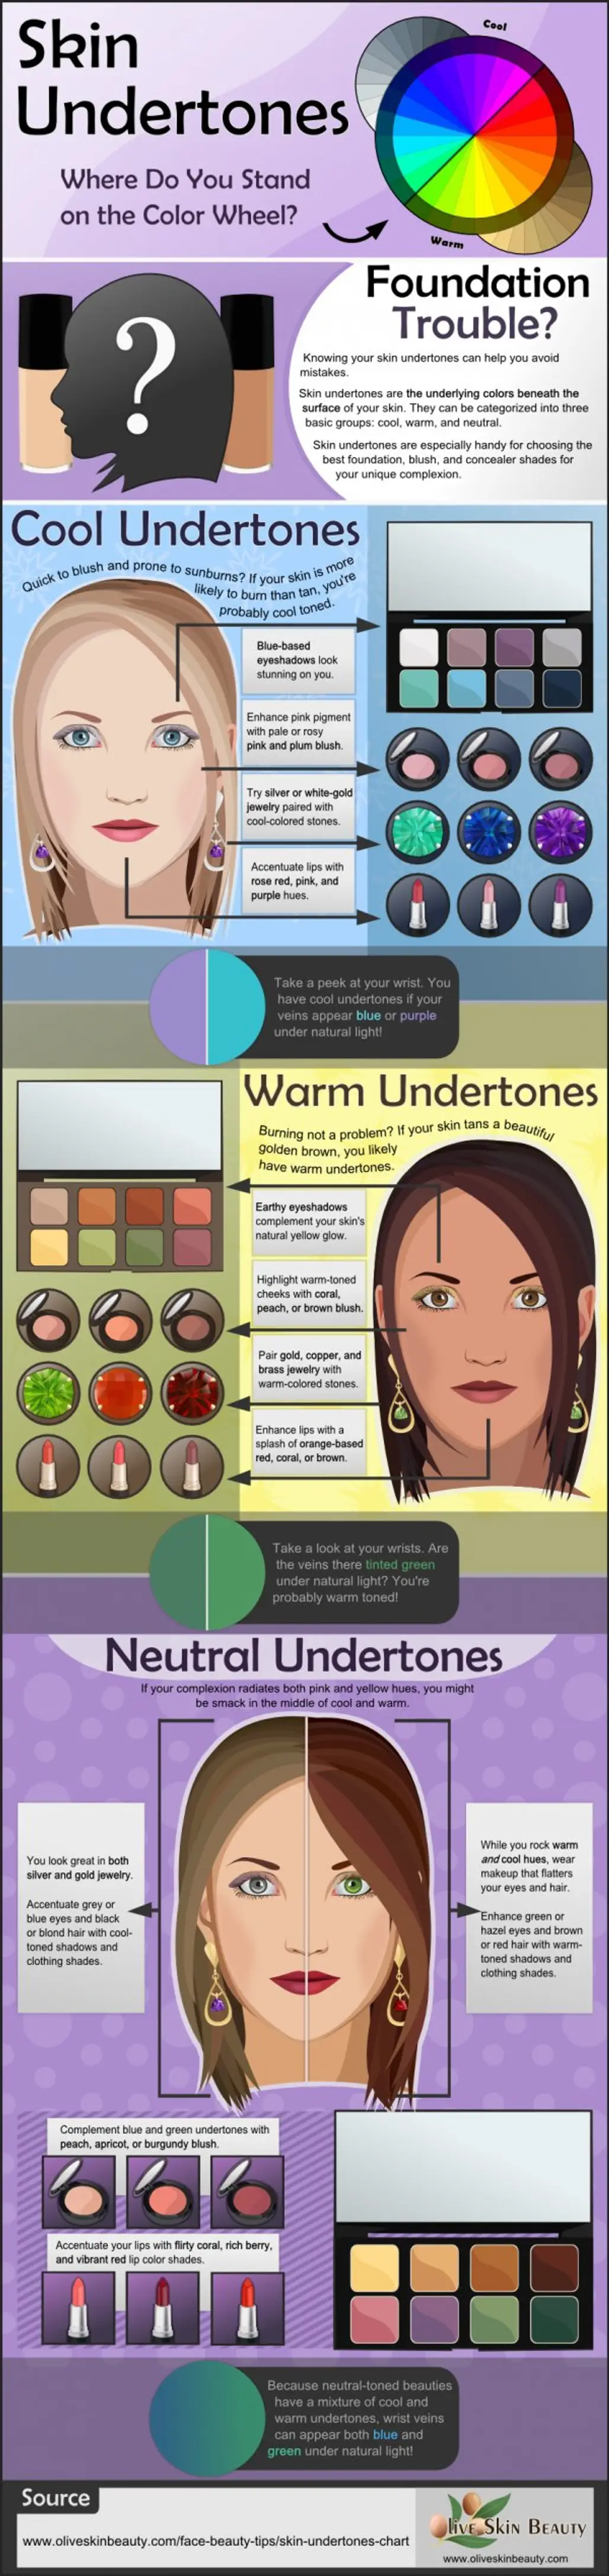 Skin Undertones: Where do You Stand on the Color Wheel?